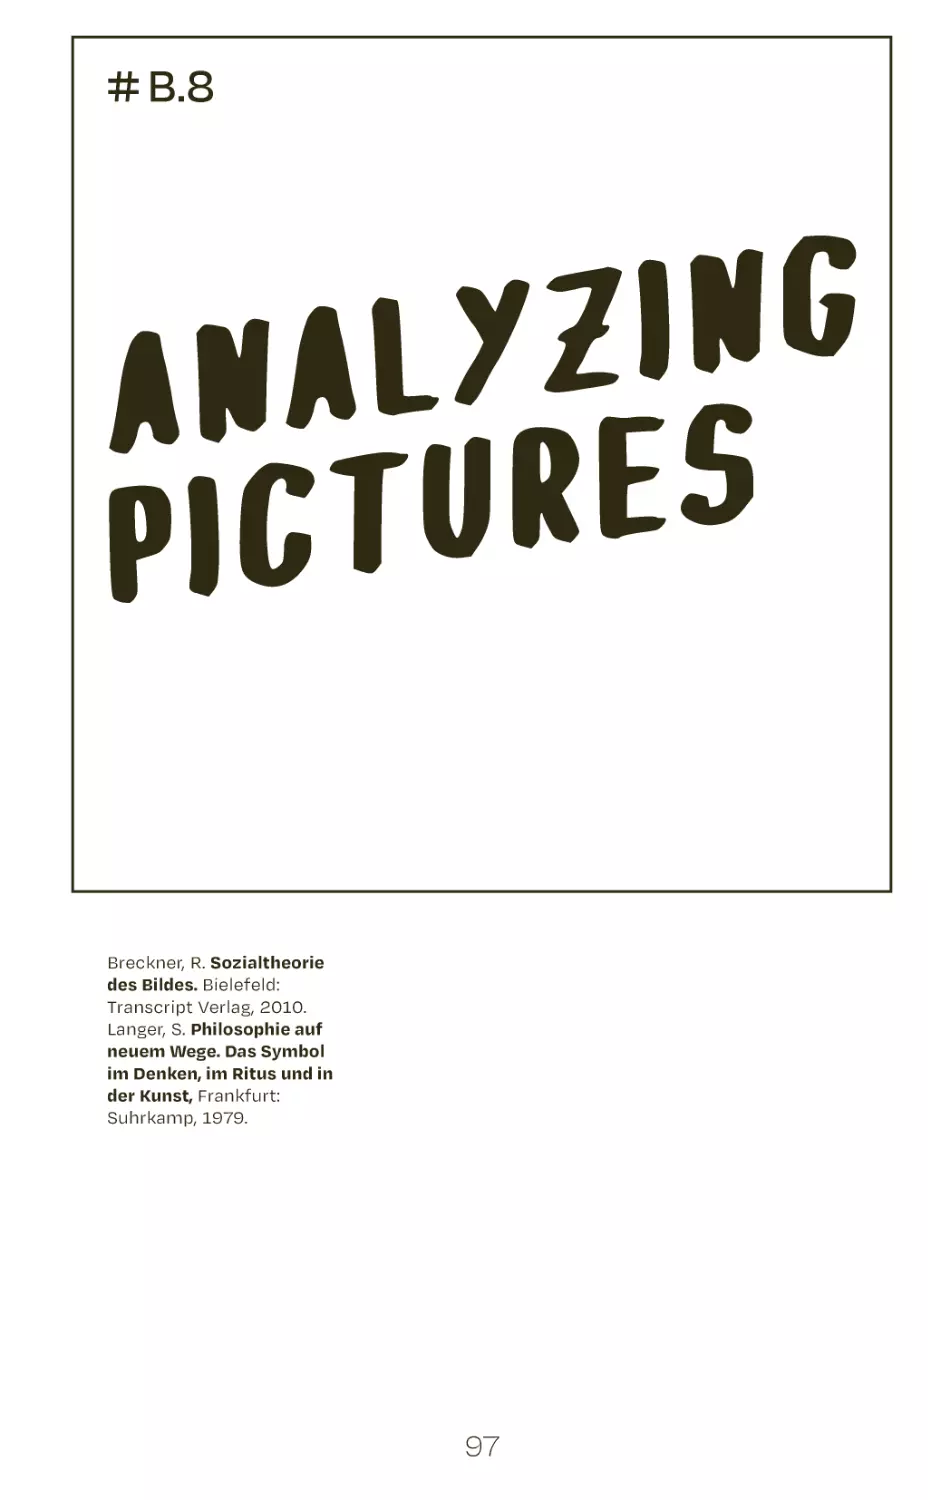 # B.8 analyzing pictures